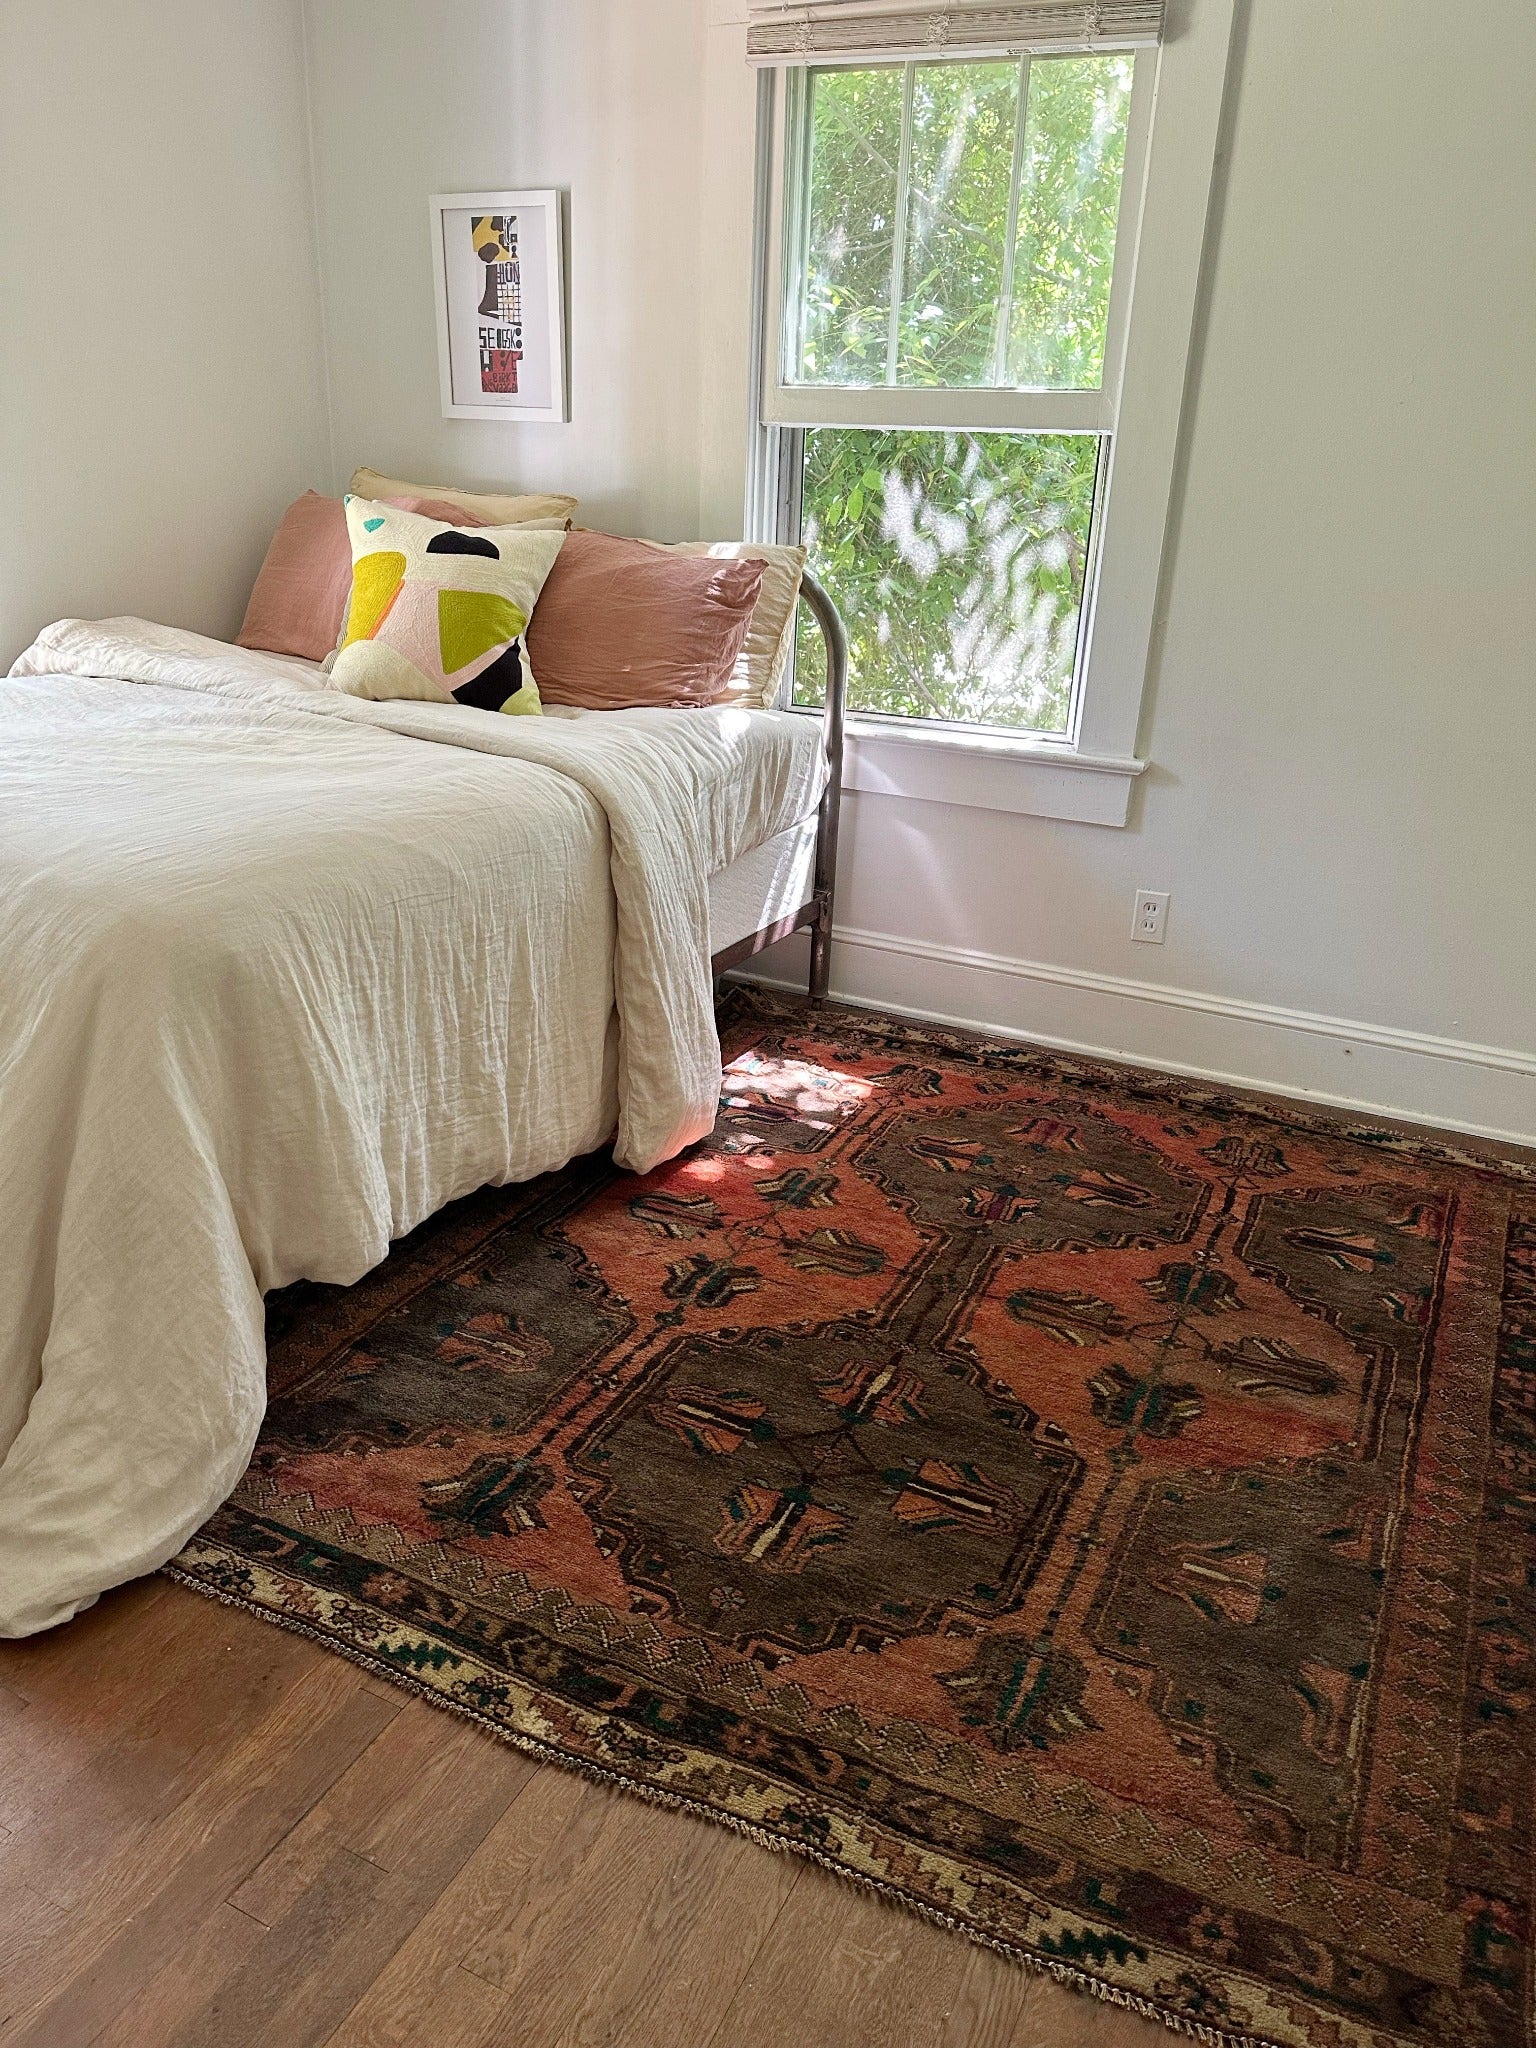 Copper Persian rug looks so inviting in a bright bedroom in the afternoon.